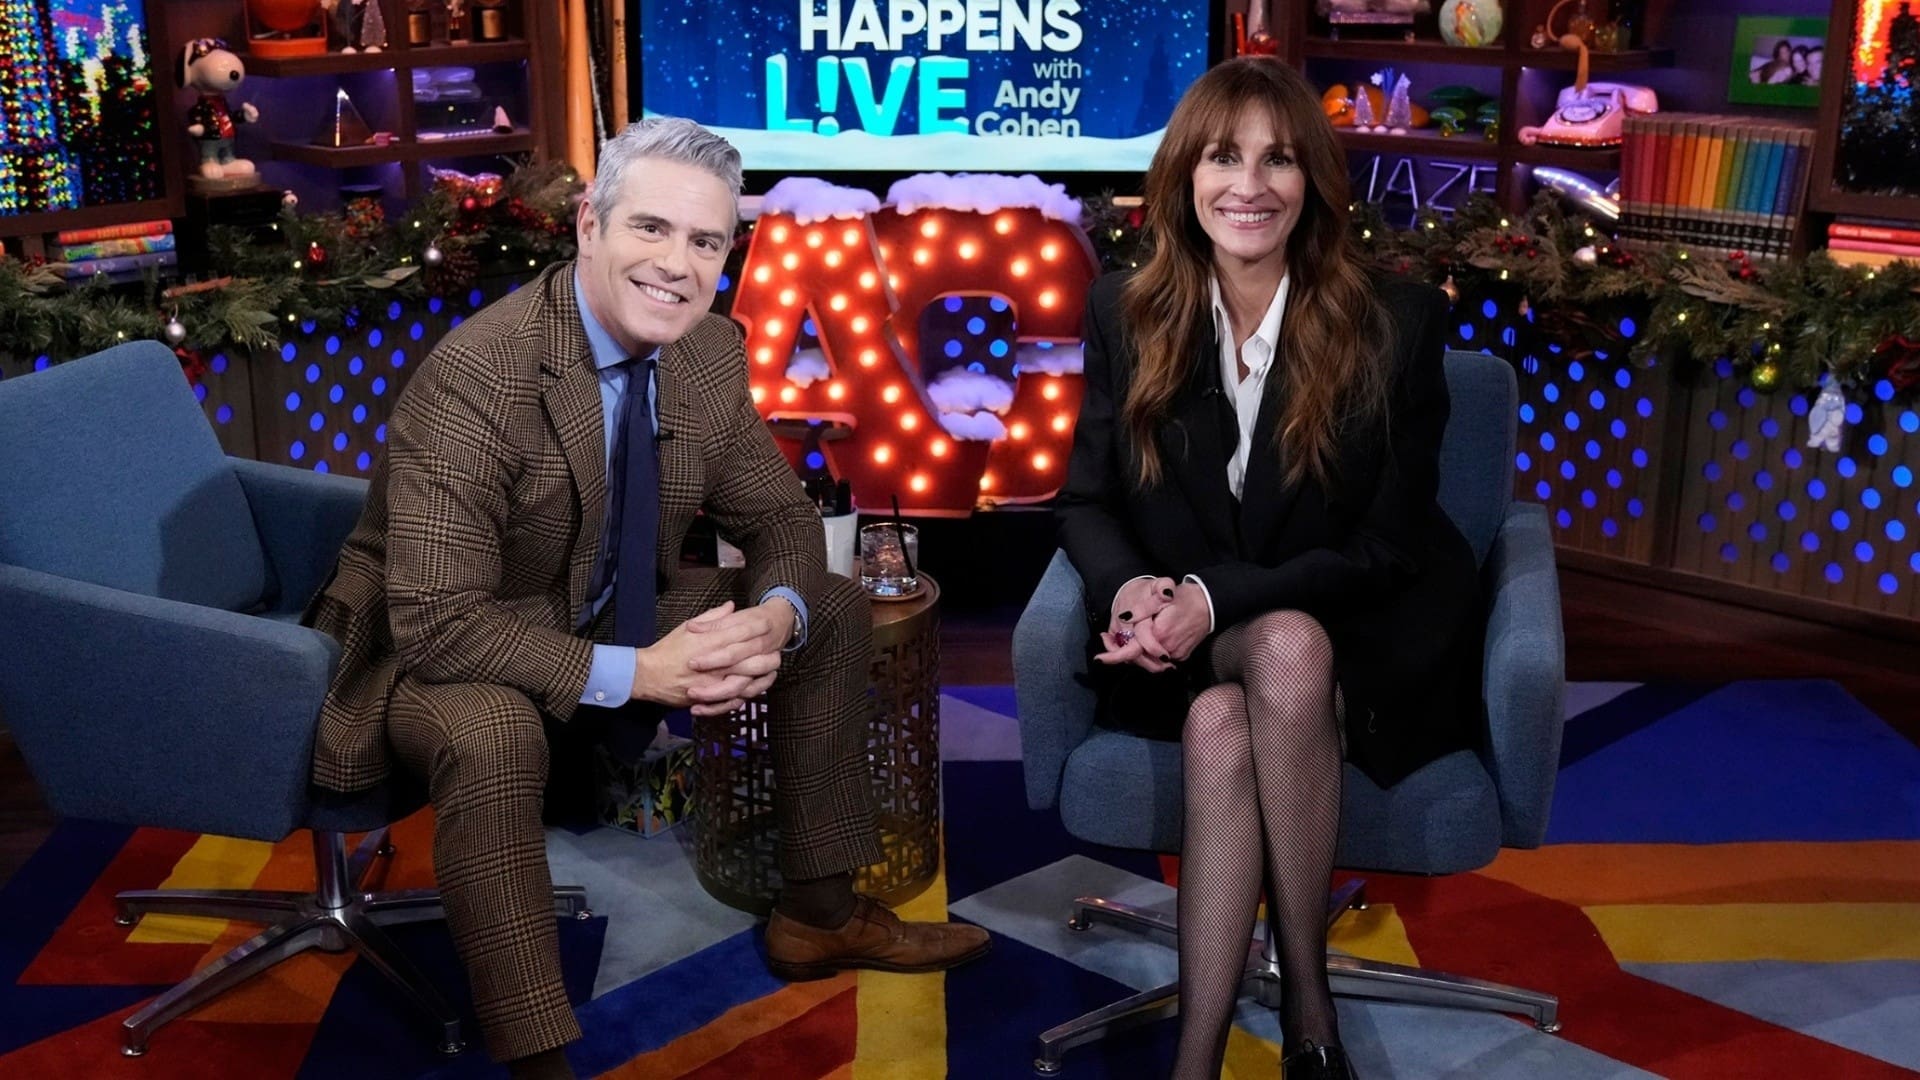 Watch What Happens Live with Andy Cohen Staffel 20 :Folge 196 